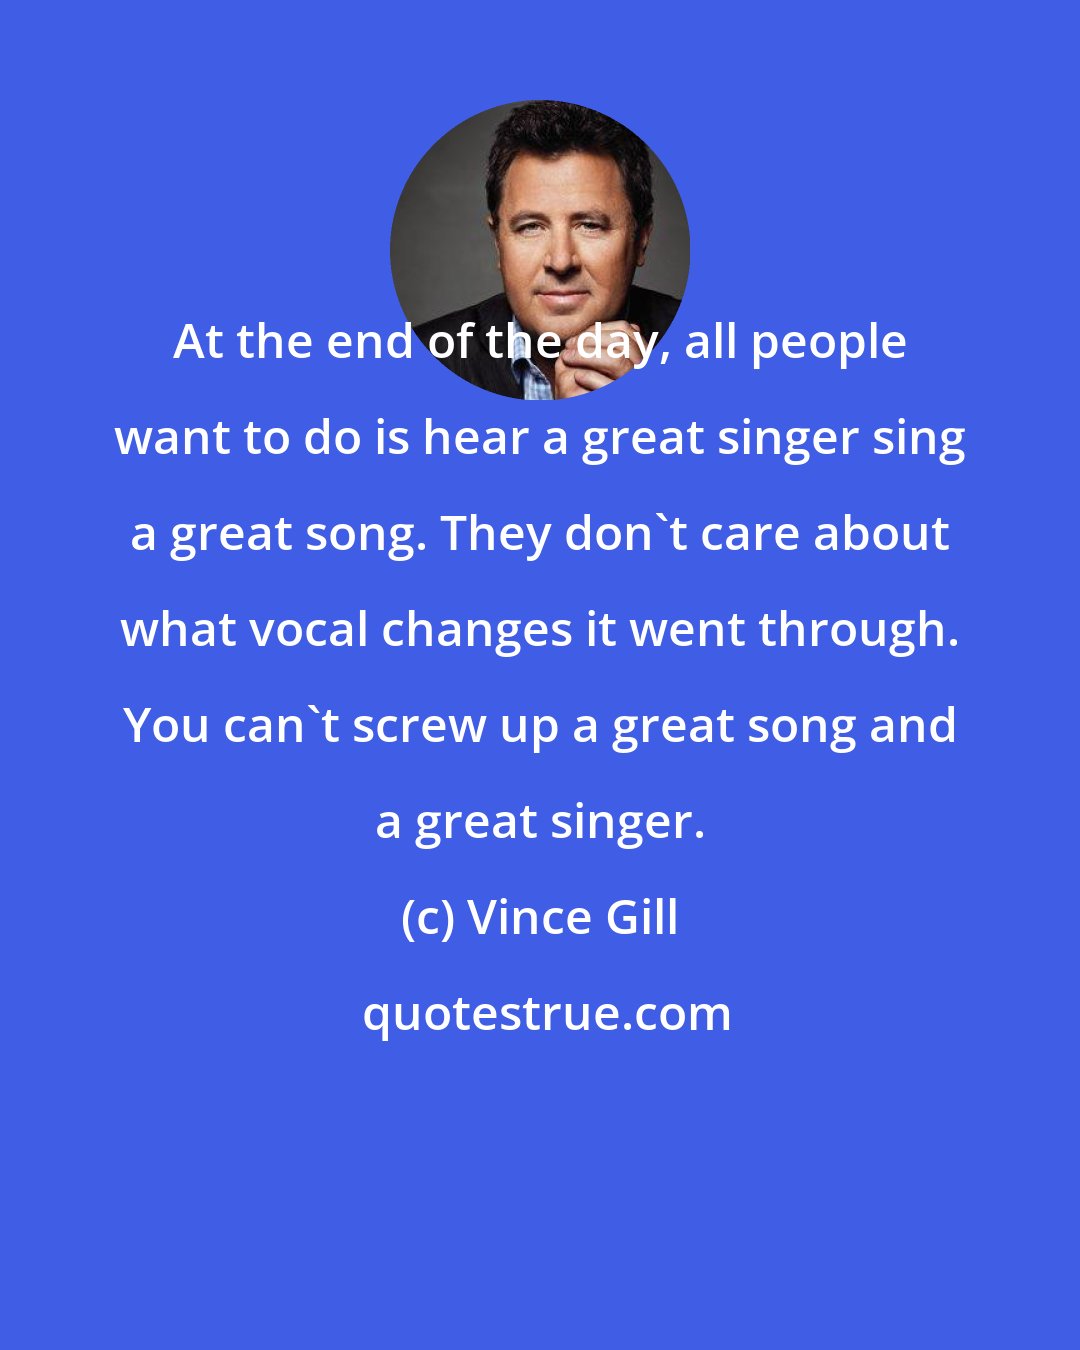 Vince Gill: At the end of the day, all people want to do is hear a great singer sing a great song. They don't care about what vocal changes it went through. You can't screw up a great song and a great singer.